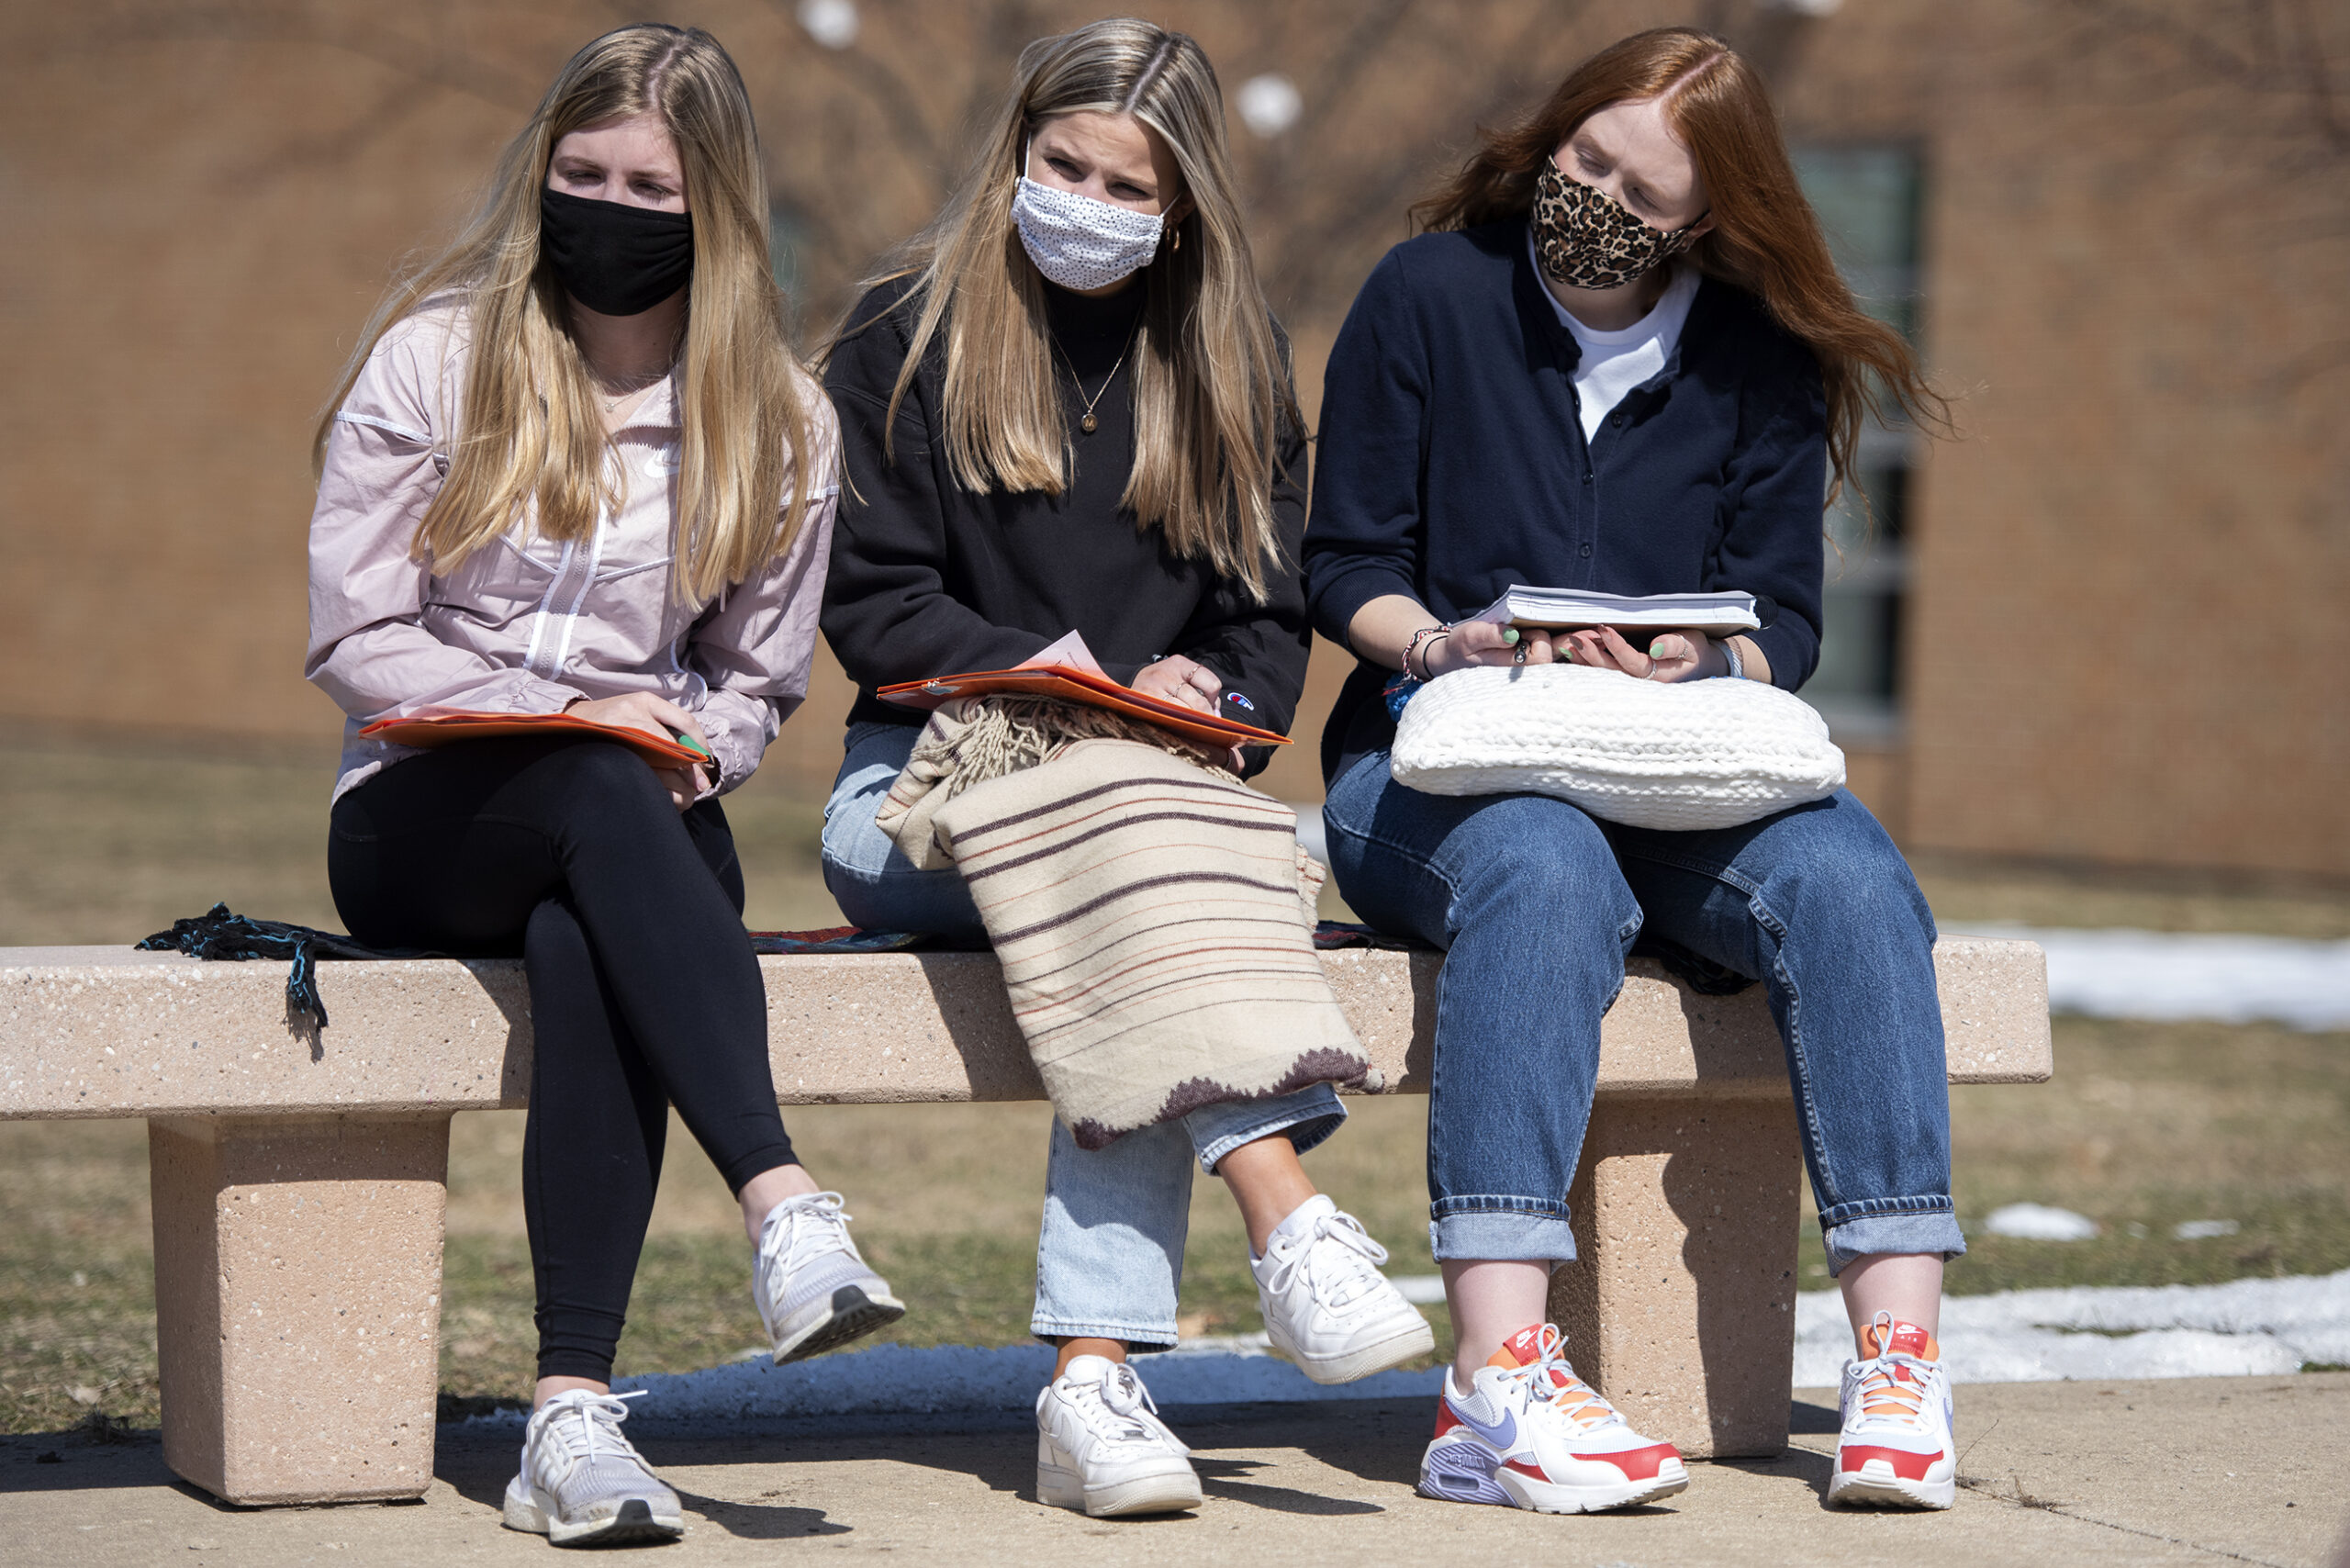 Three girls with long hair sit on a bench outdoors holding notebooks and wearing face masks.